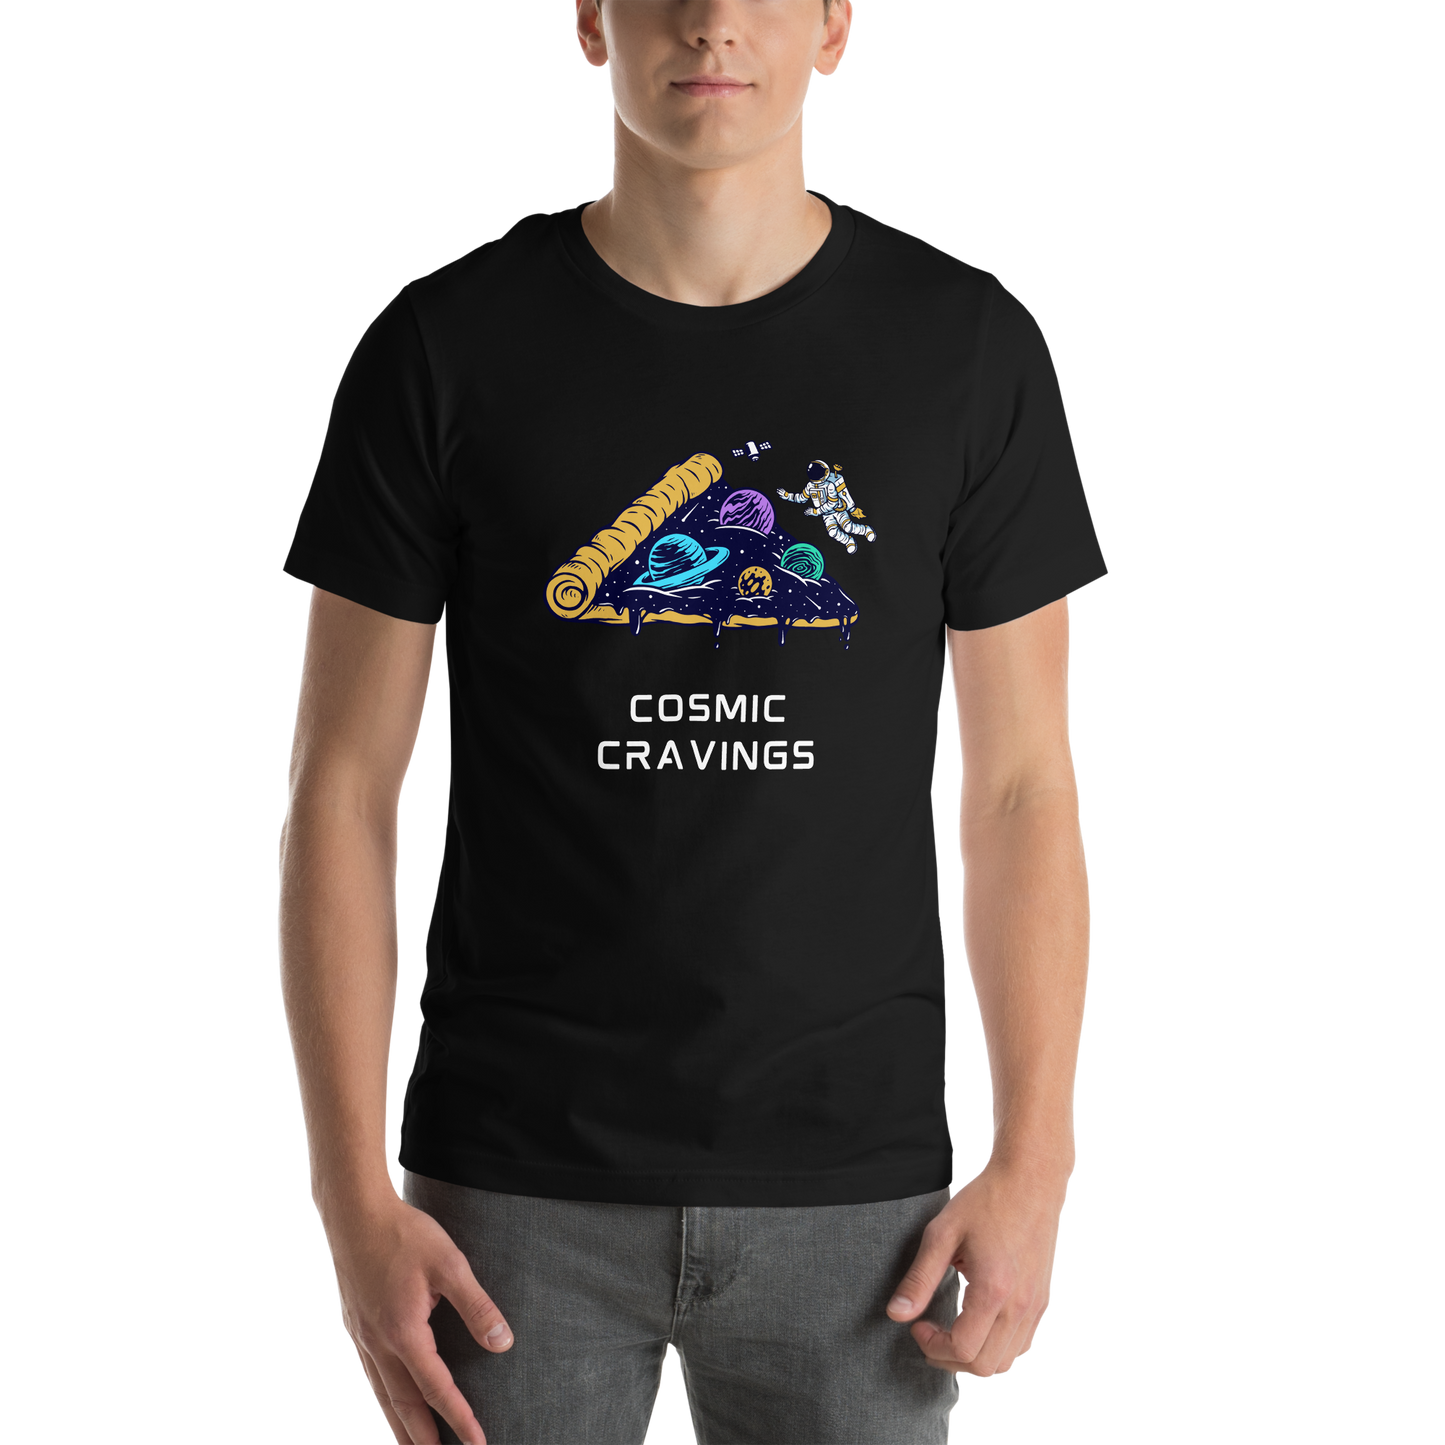 Man wearing a Black Premium Cosmic Cravings Tee featuring an Astronaut Exploring a Pizza Universe graphic on the chest - Funny Graphic Space Tees - Boozy Fox